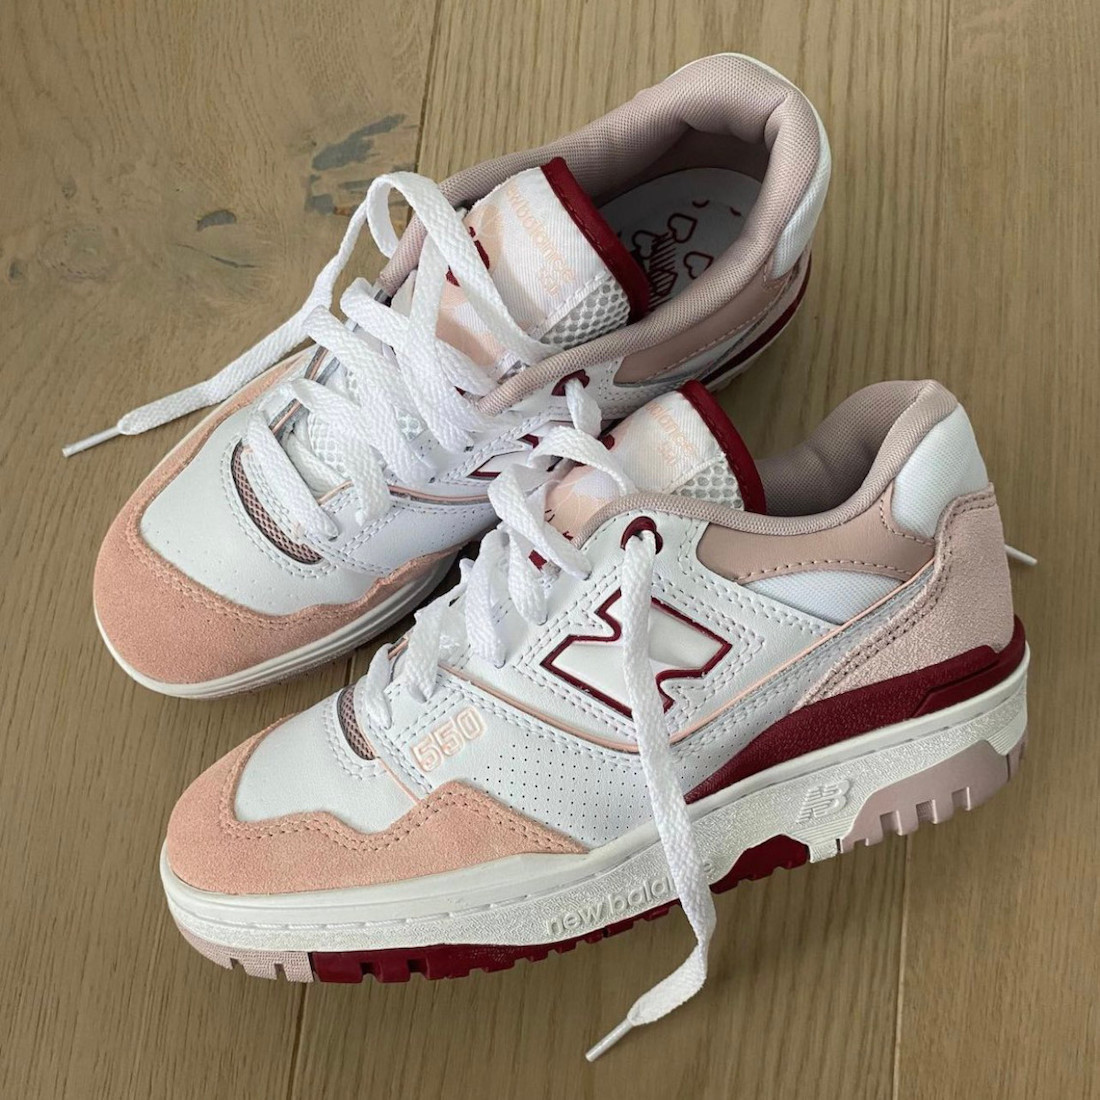 New Balance NCLAY Gray Sandals SUFNCLAO Hearts Valentines Day Release Date